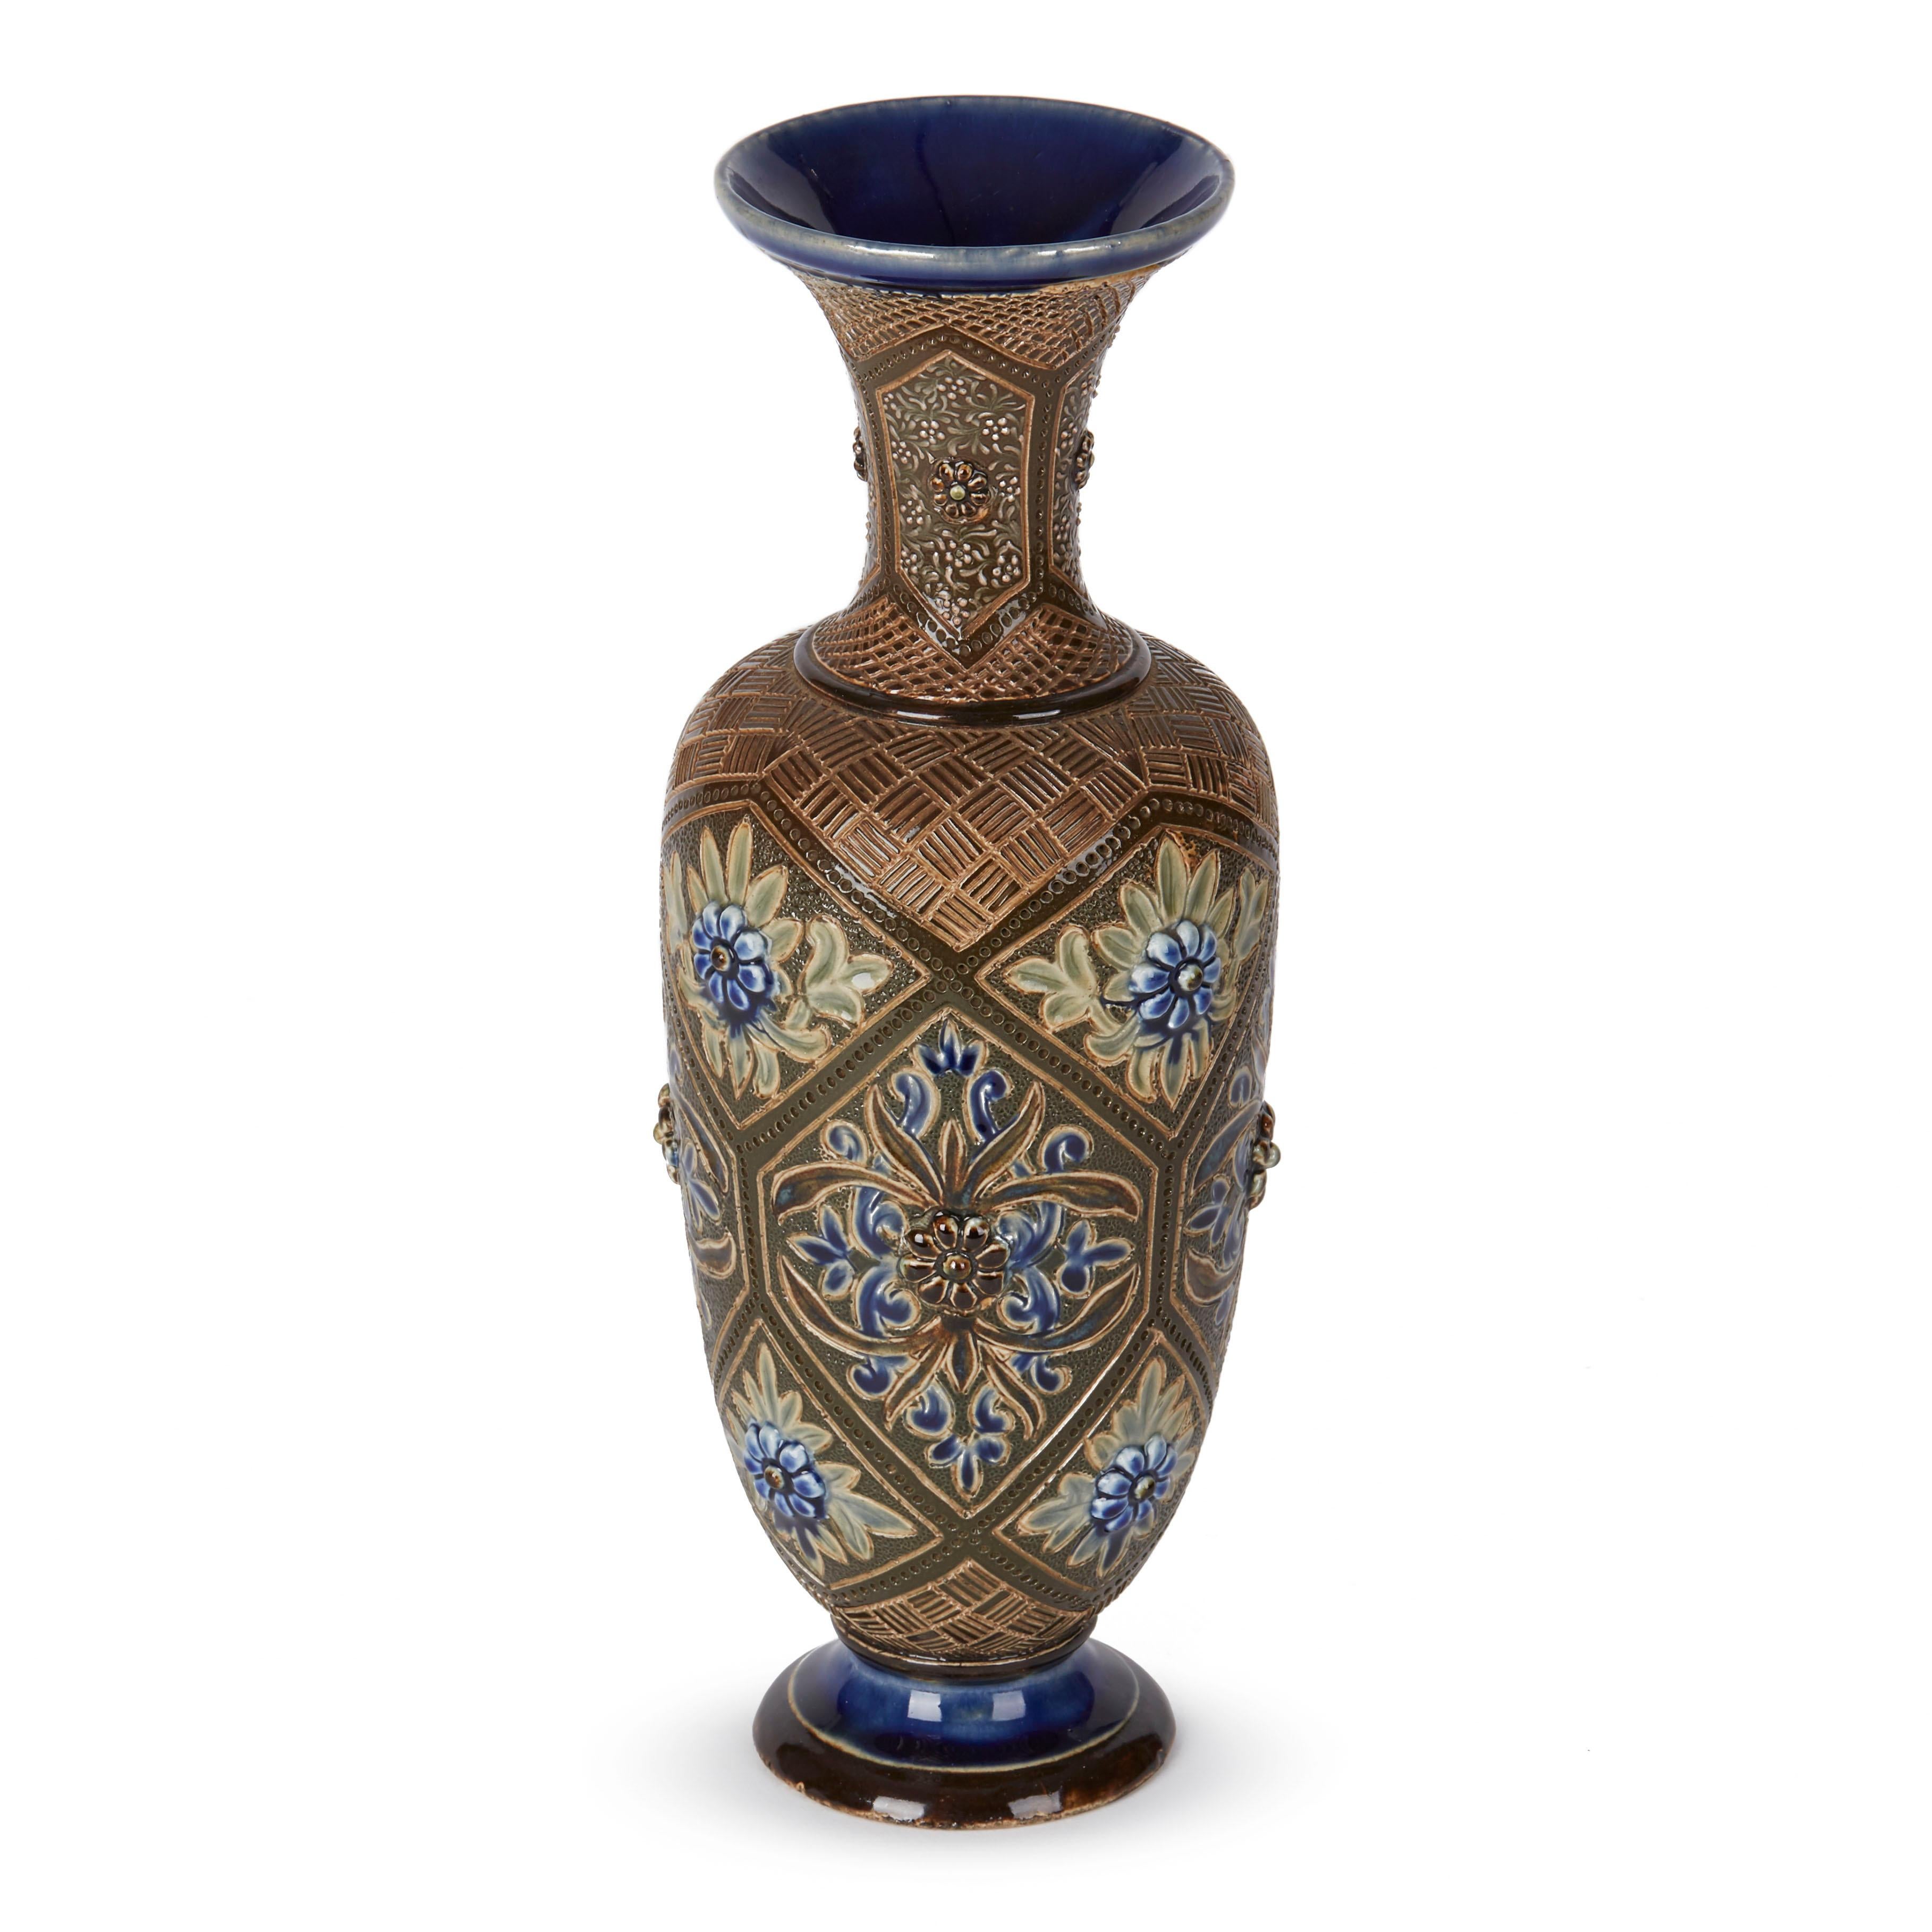 An exceptional and elegantly shaped Doutlon Lambeth art pottery stoneware vase of tall bulbous shape standing on a narrow rounded pedestal foot and with a trumpet shaped top by renowned artist Frank Butler. The vase is decorated with stylised